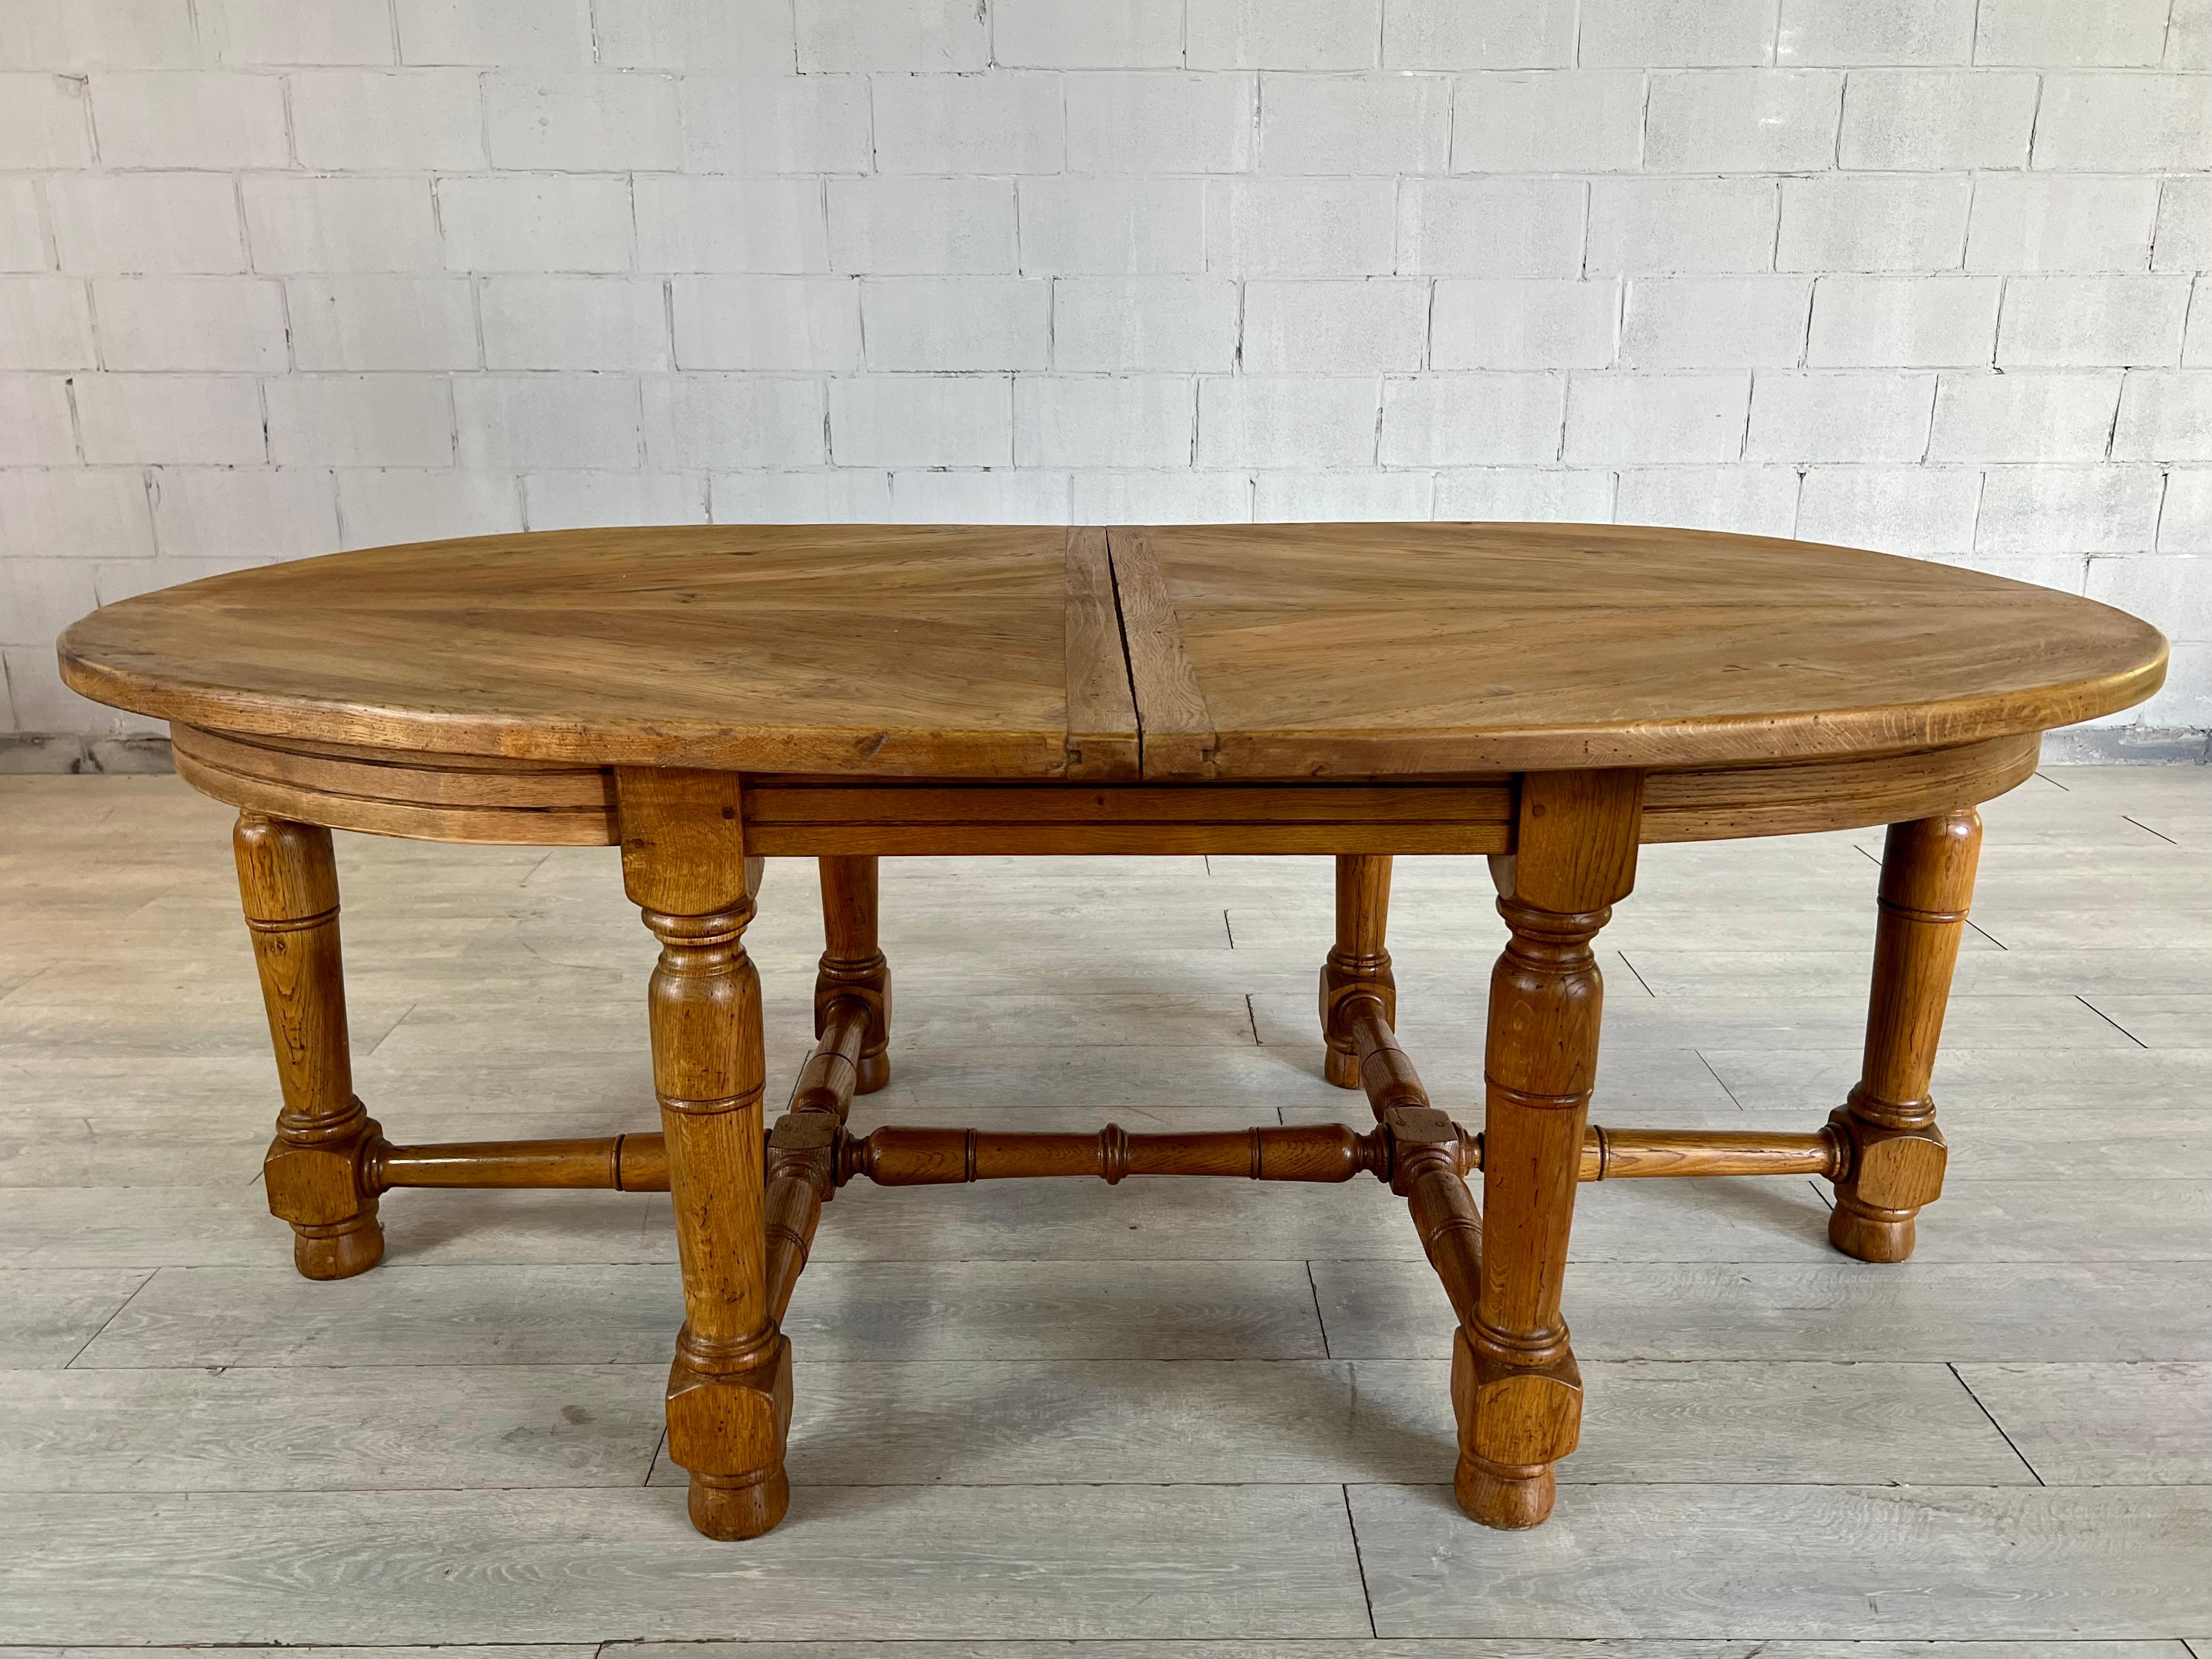 vintage extendable dining table